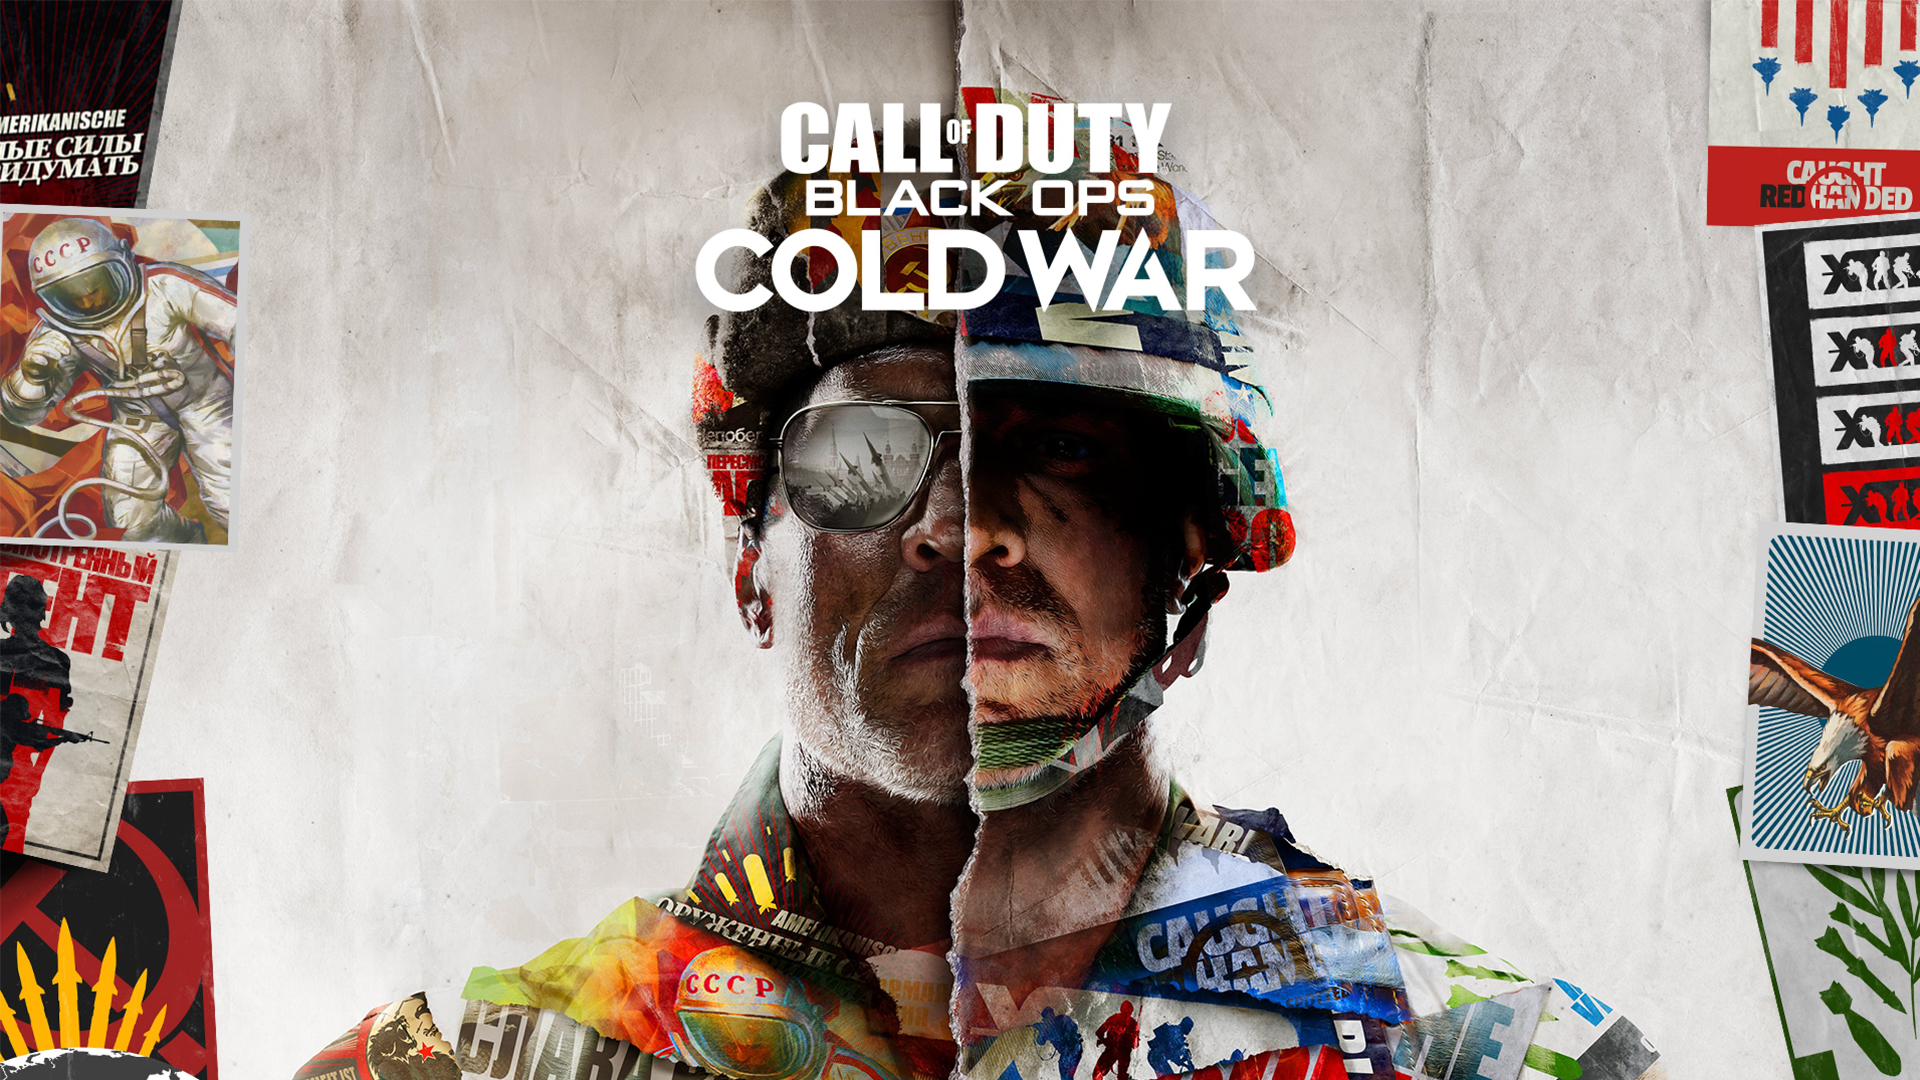 Call of Duty Black OPS: Cold War